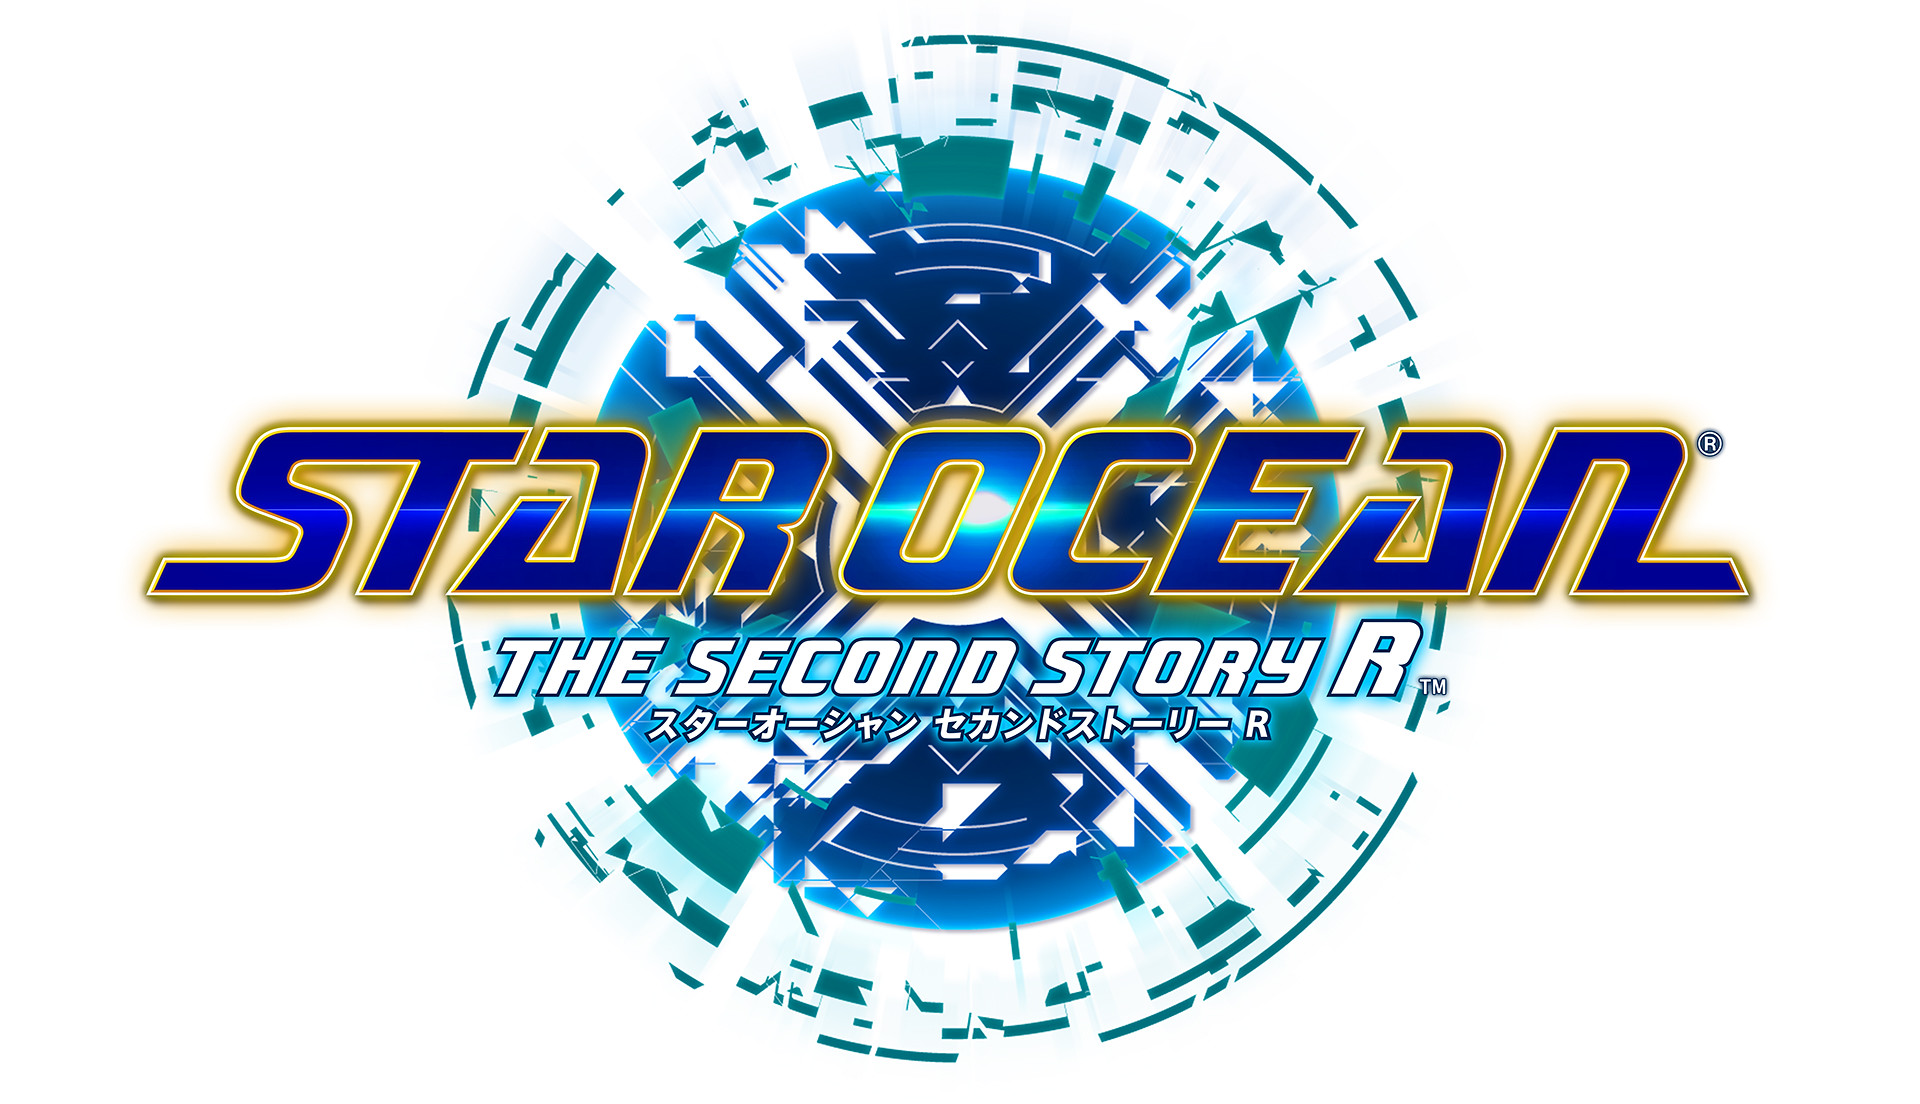 Star Ocean The Second Story R Hands-on report: A classic RPG reborn